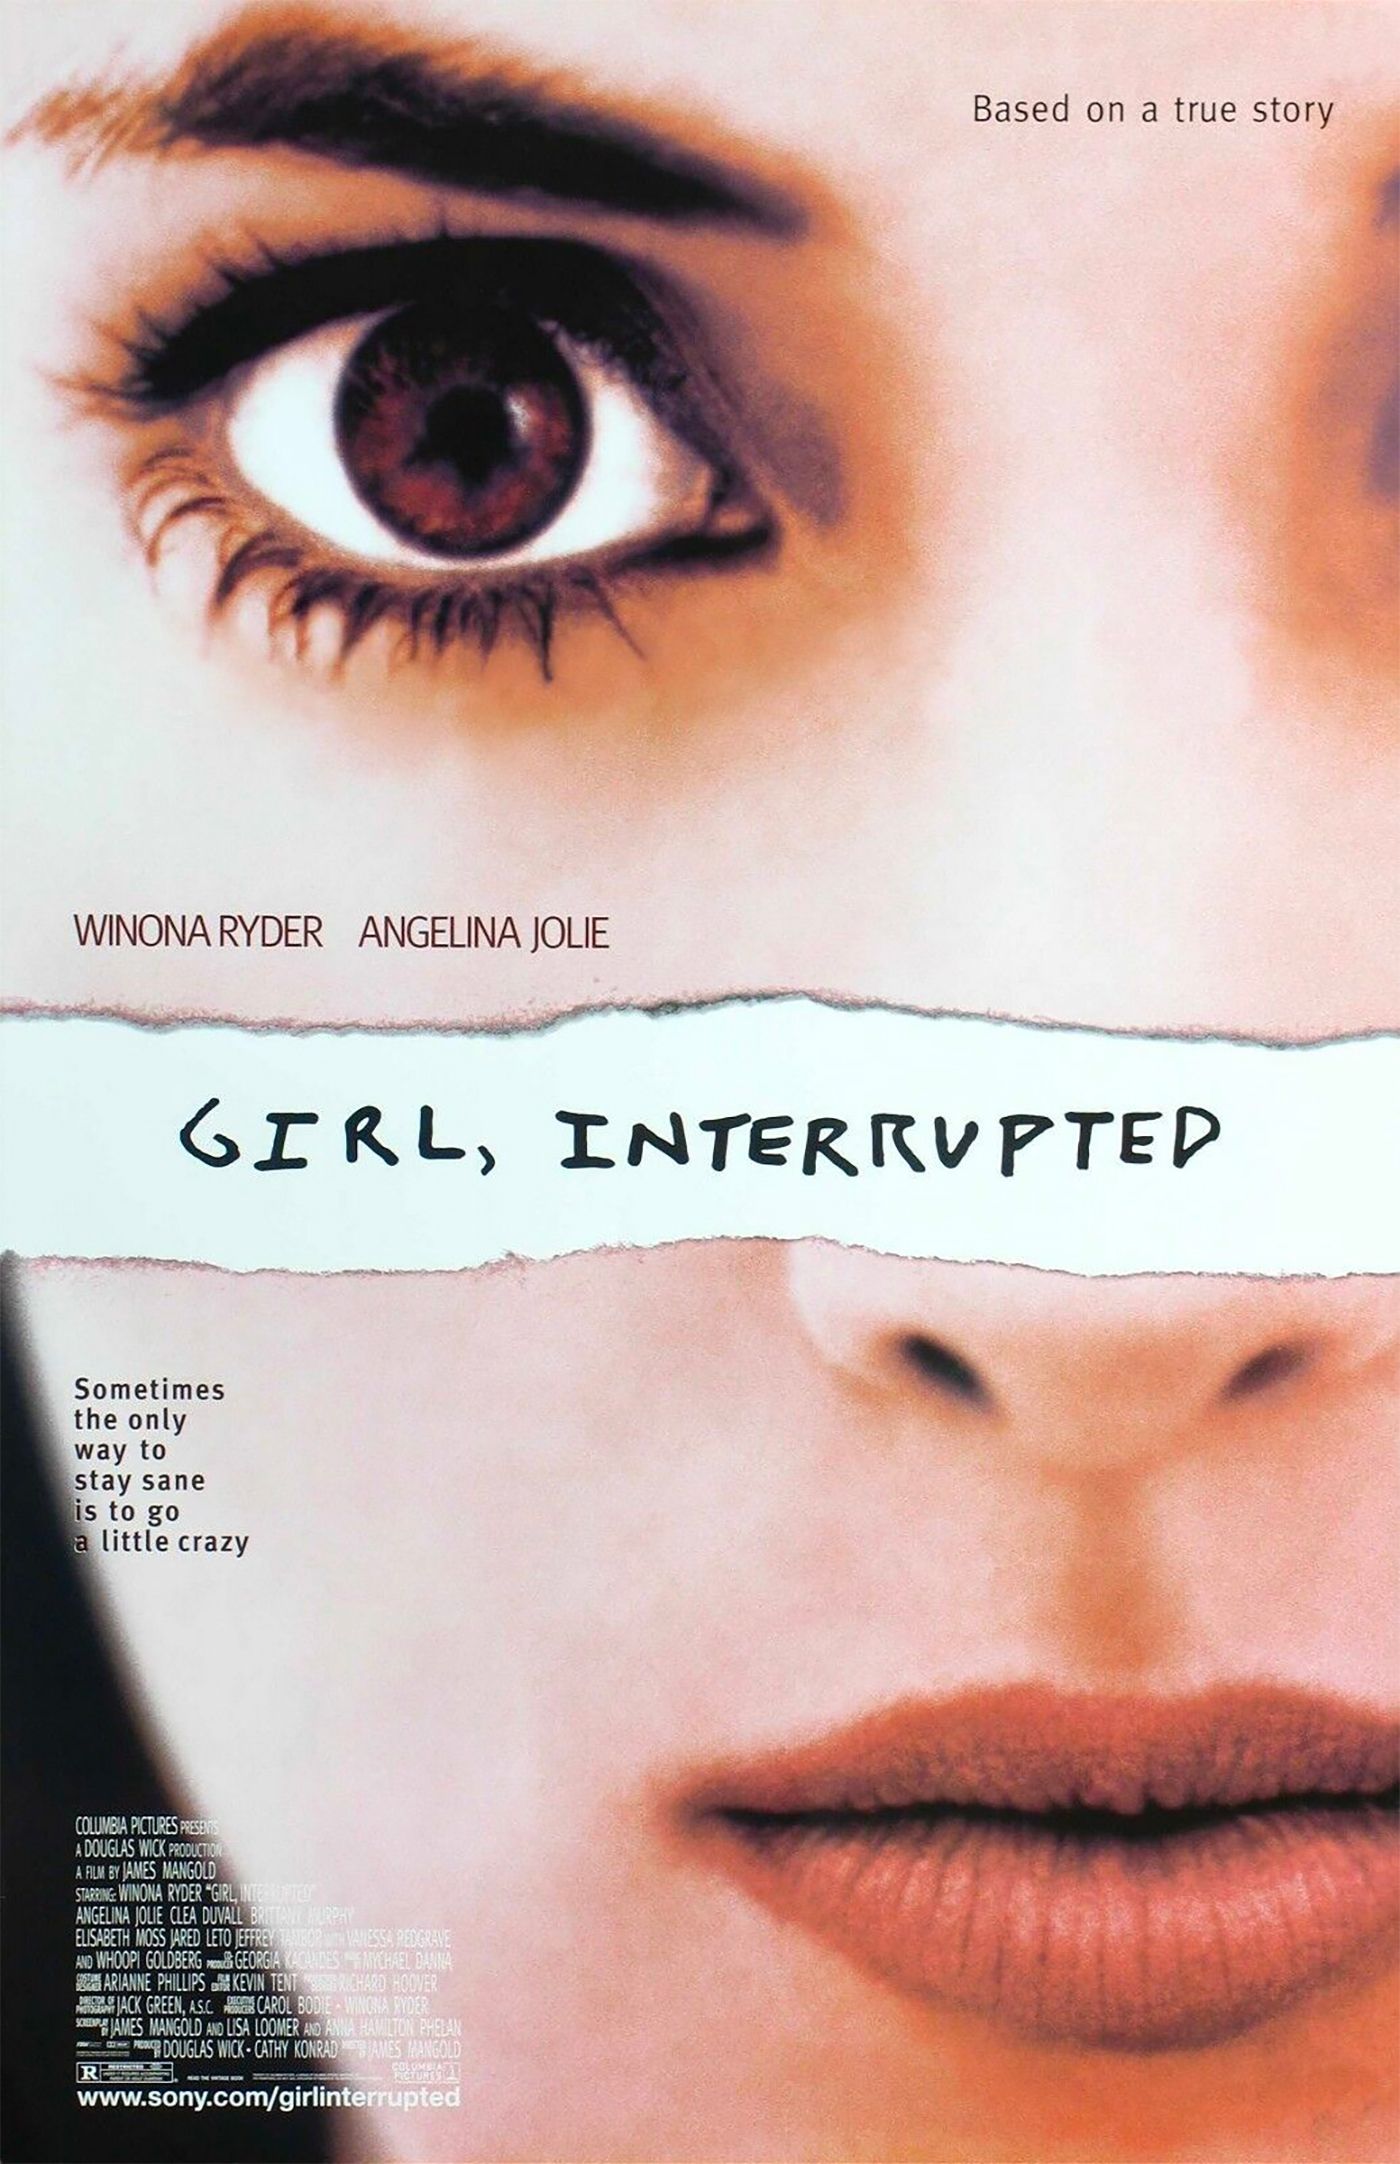 Winona Ryder in Interrupted Girl poster